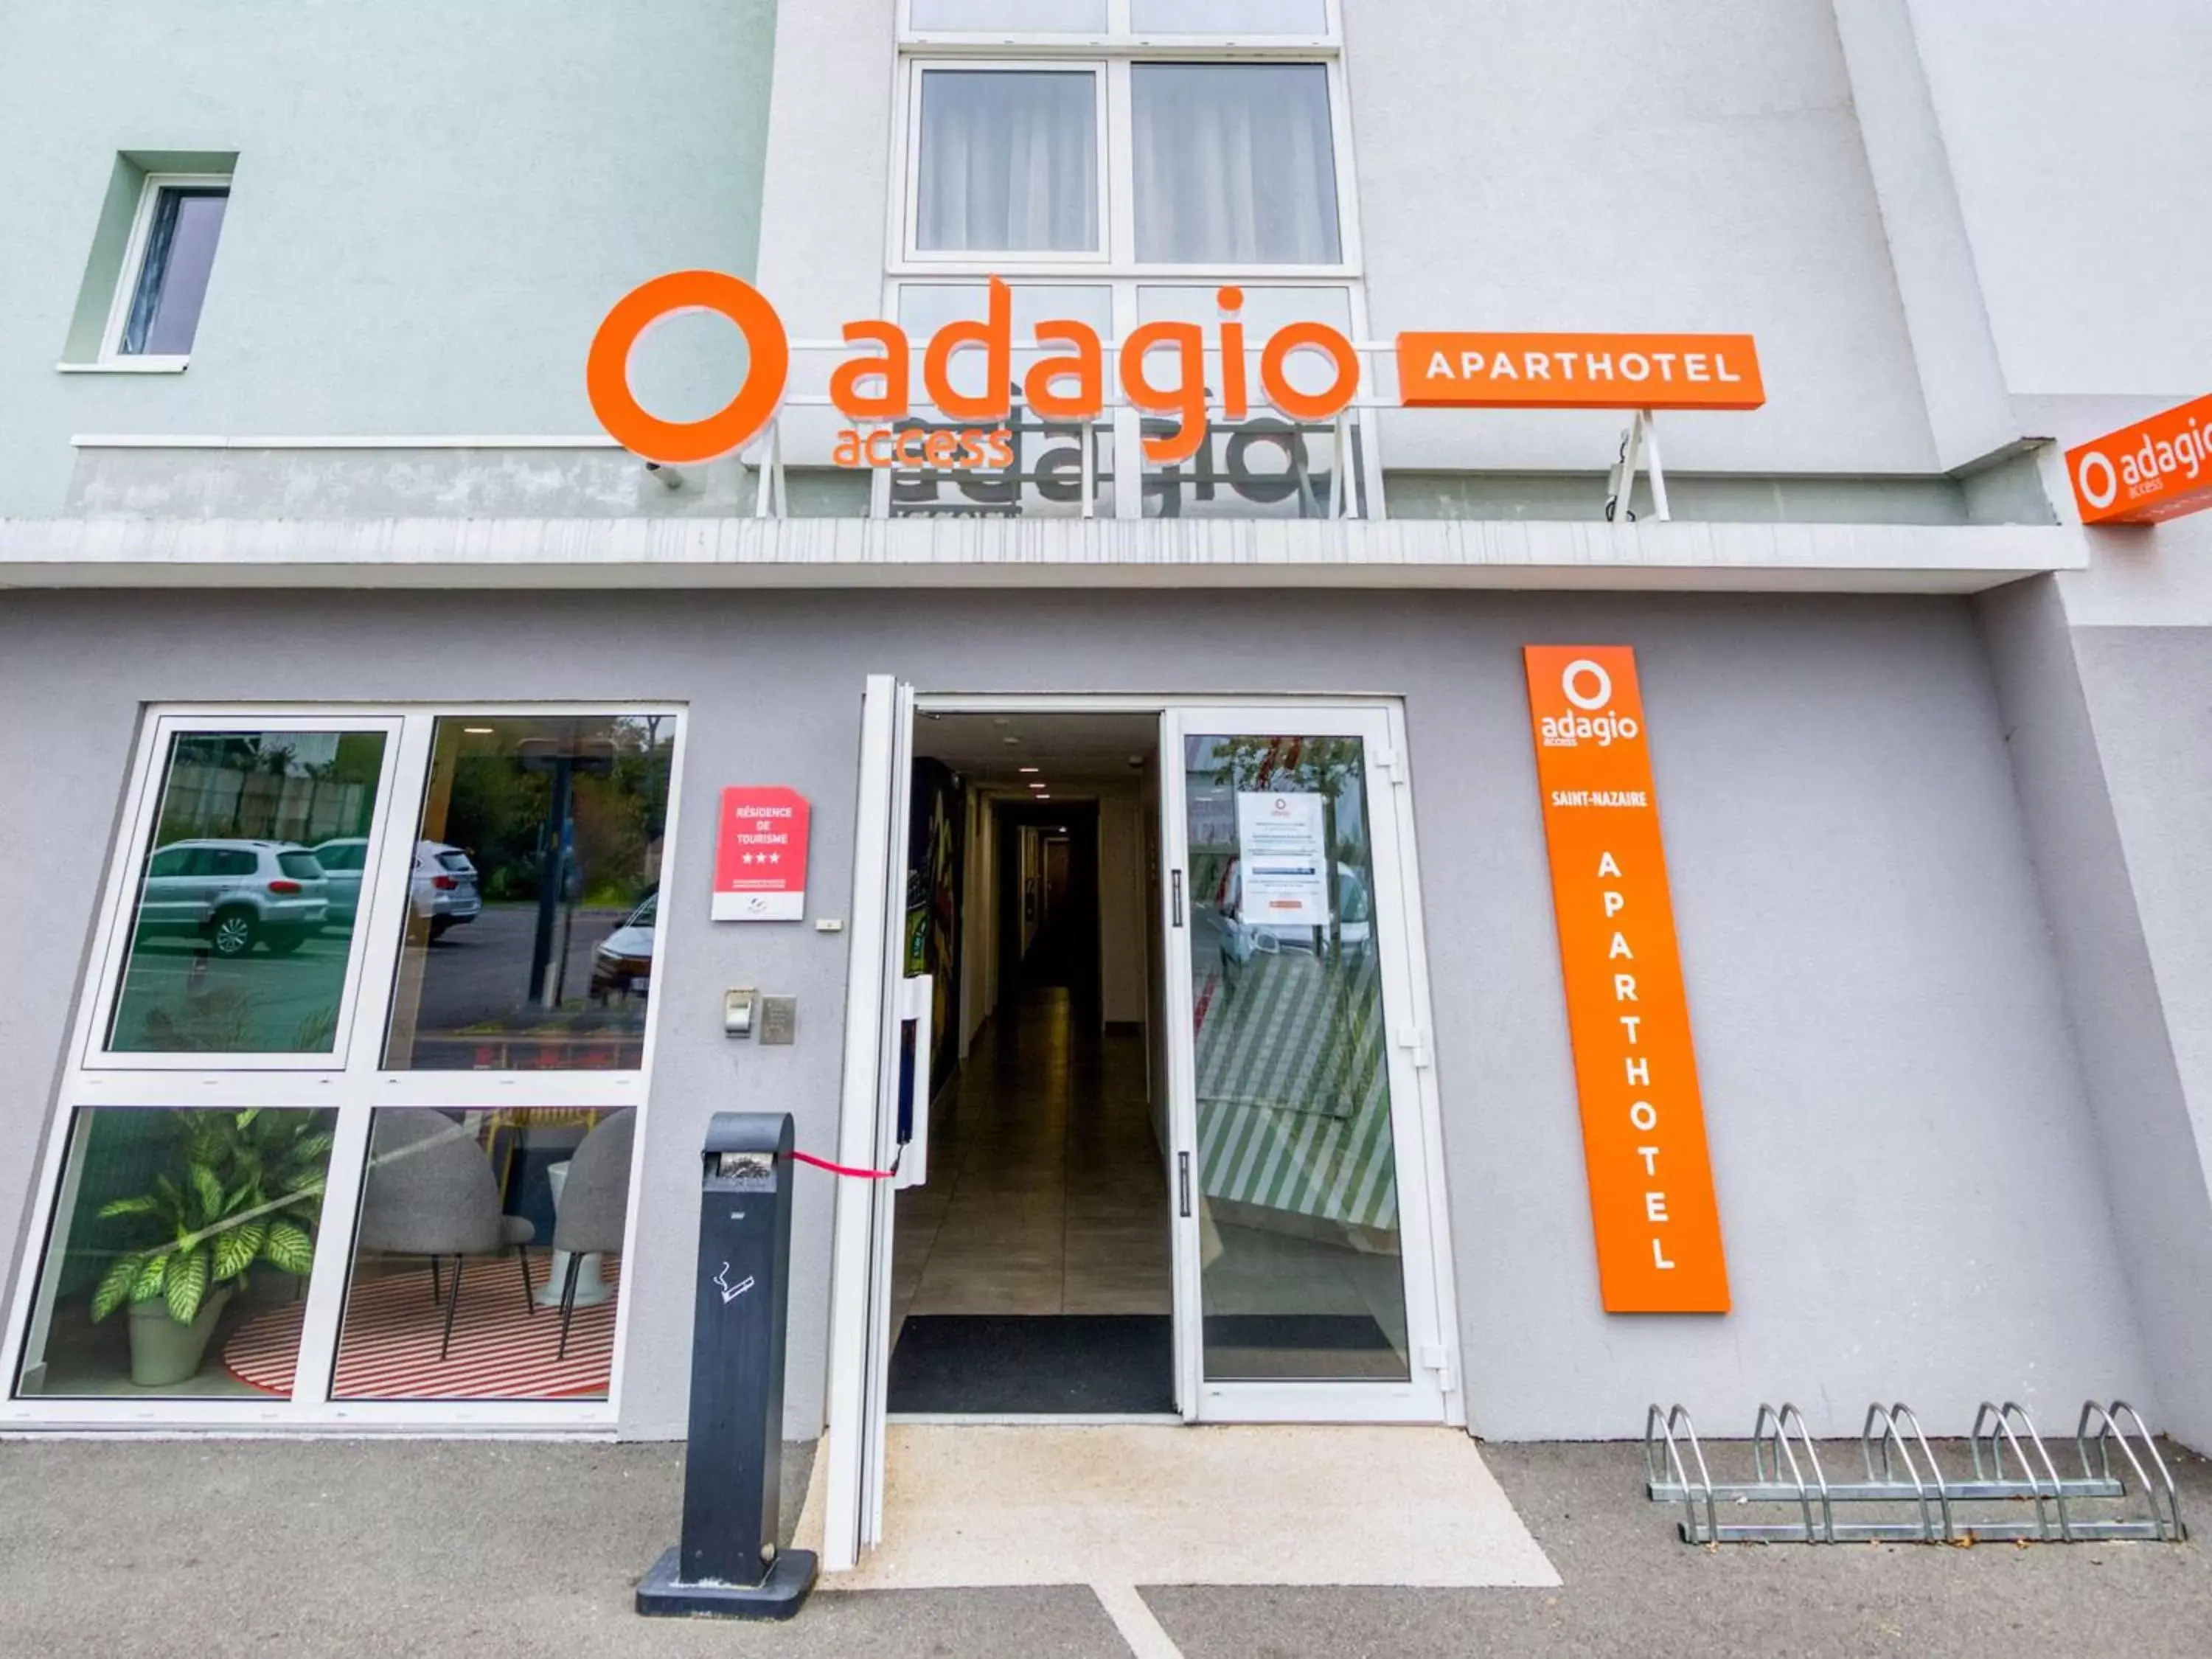 Meeting/conference room, Property Building in Aparthotel Adagio Access Saint Nazaire